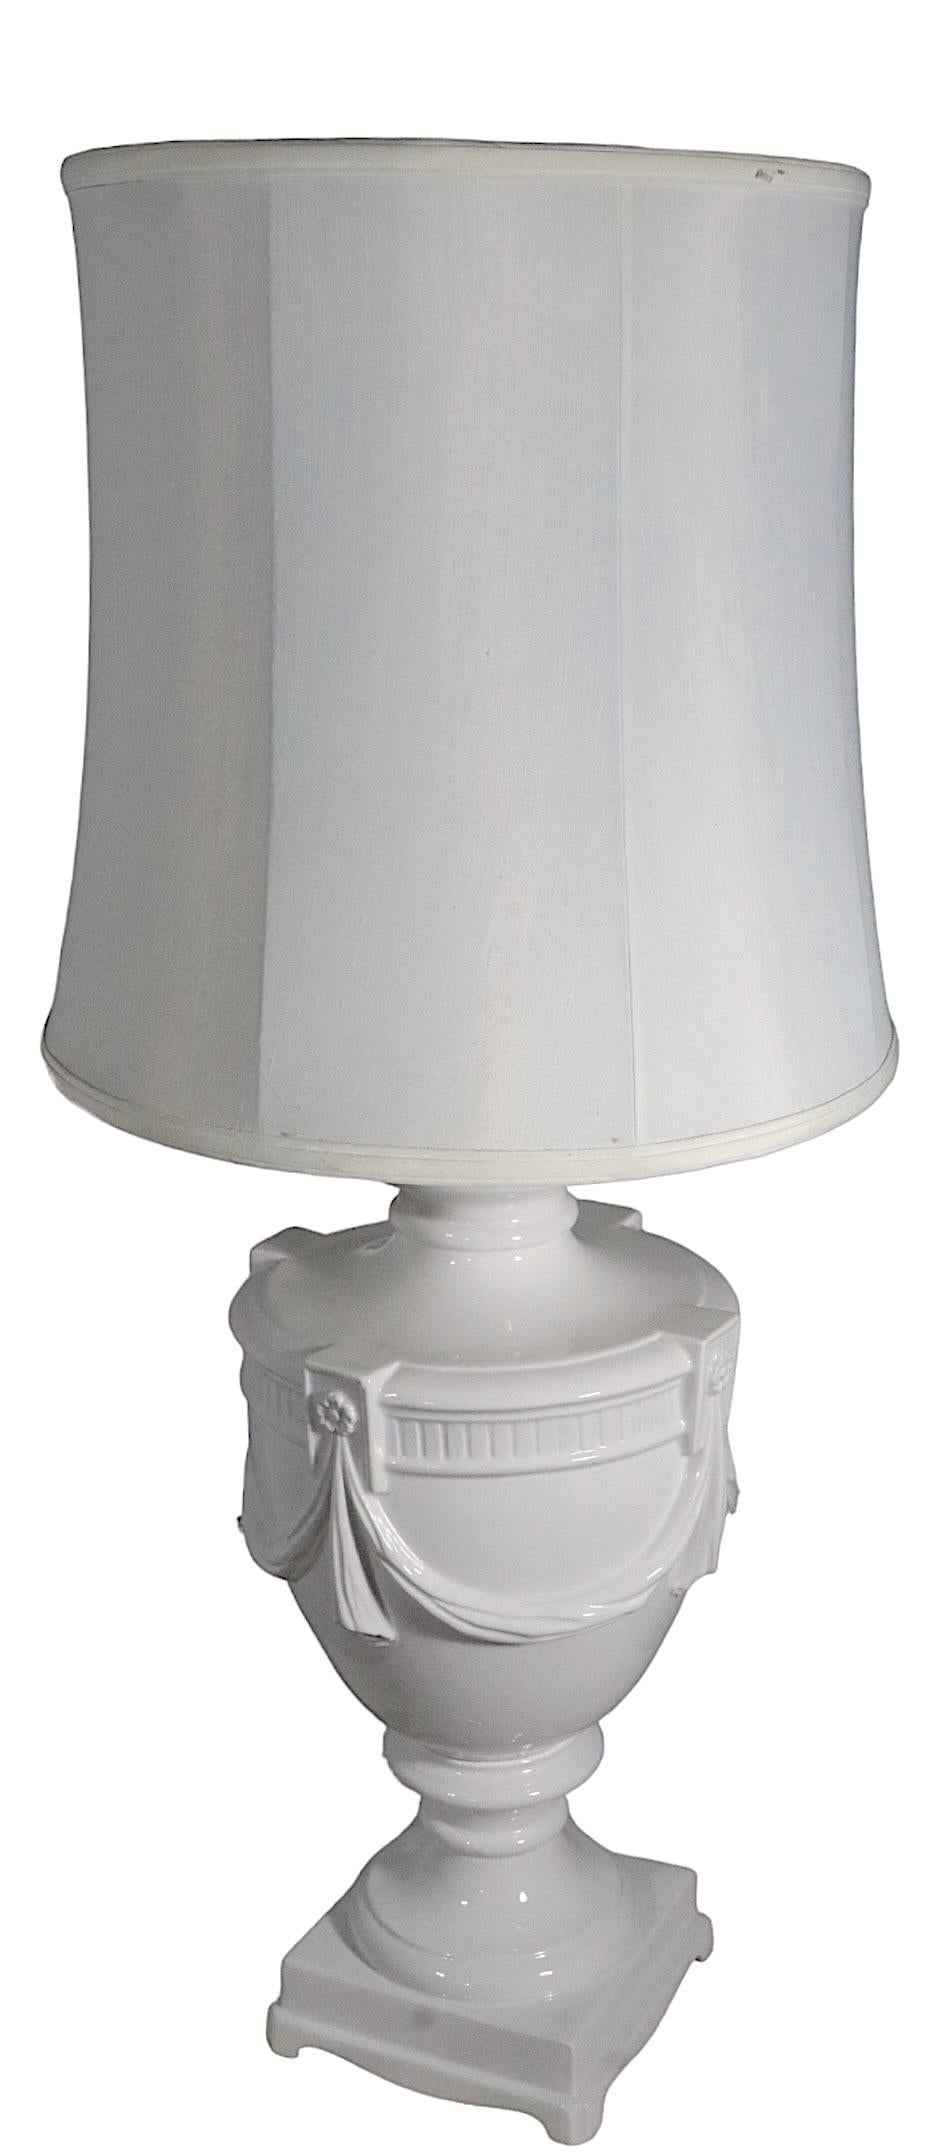 Italian White on White Ceramic Urn Form Table Lamp Made in Italy, circa, 1950s-1970s For Sale